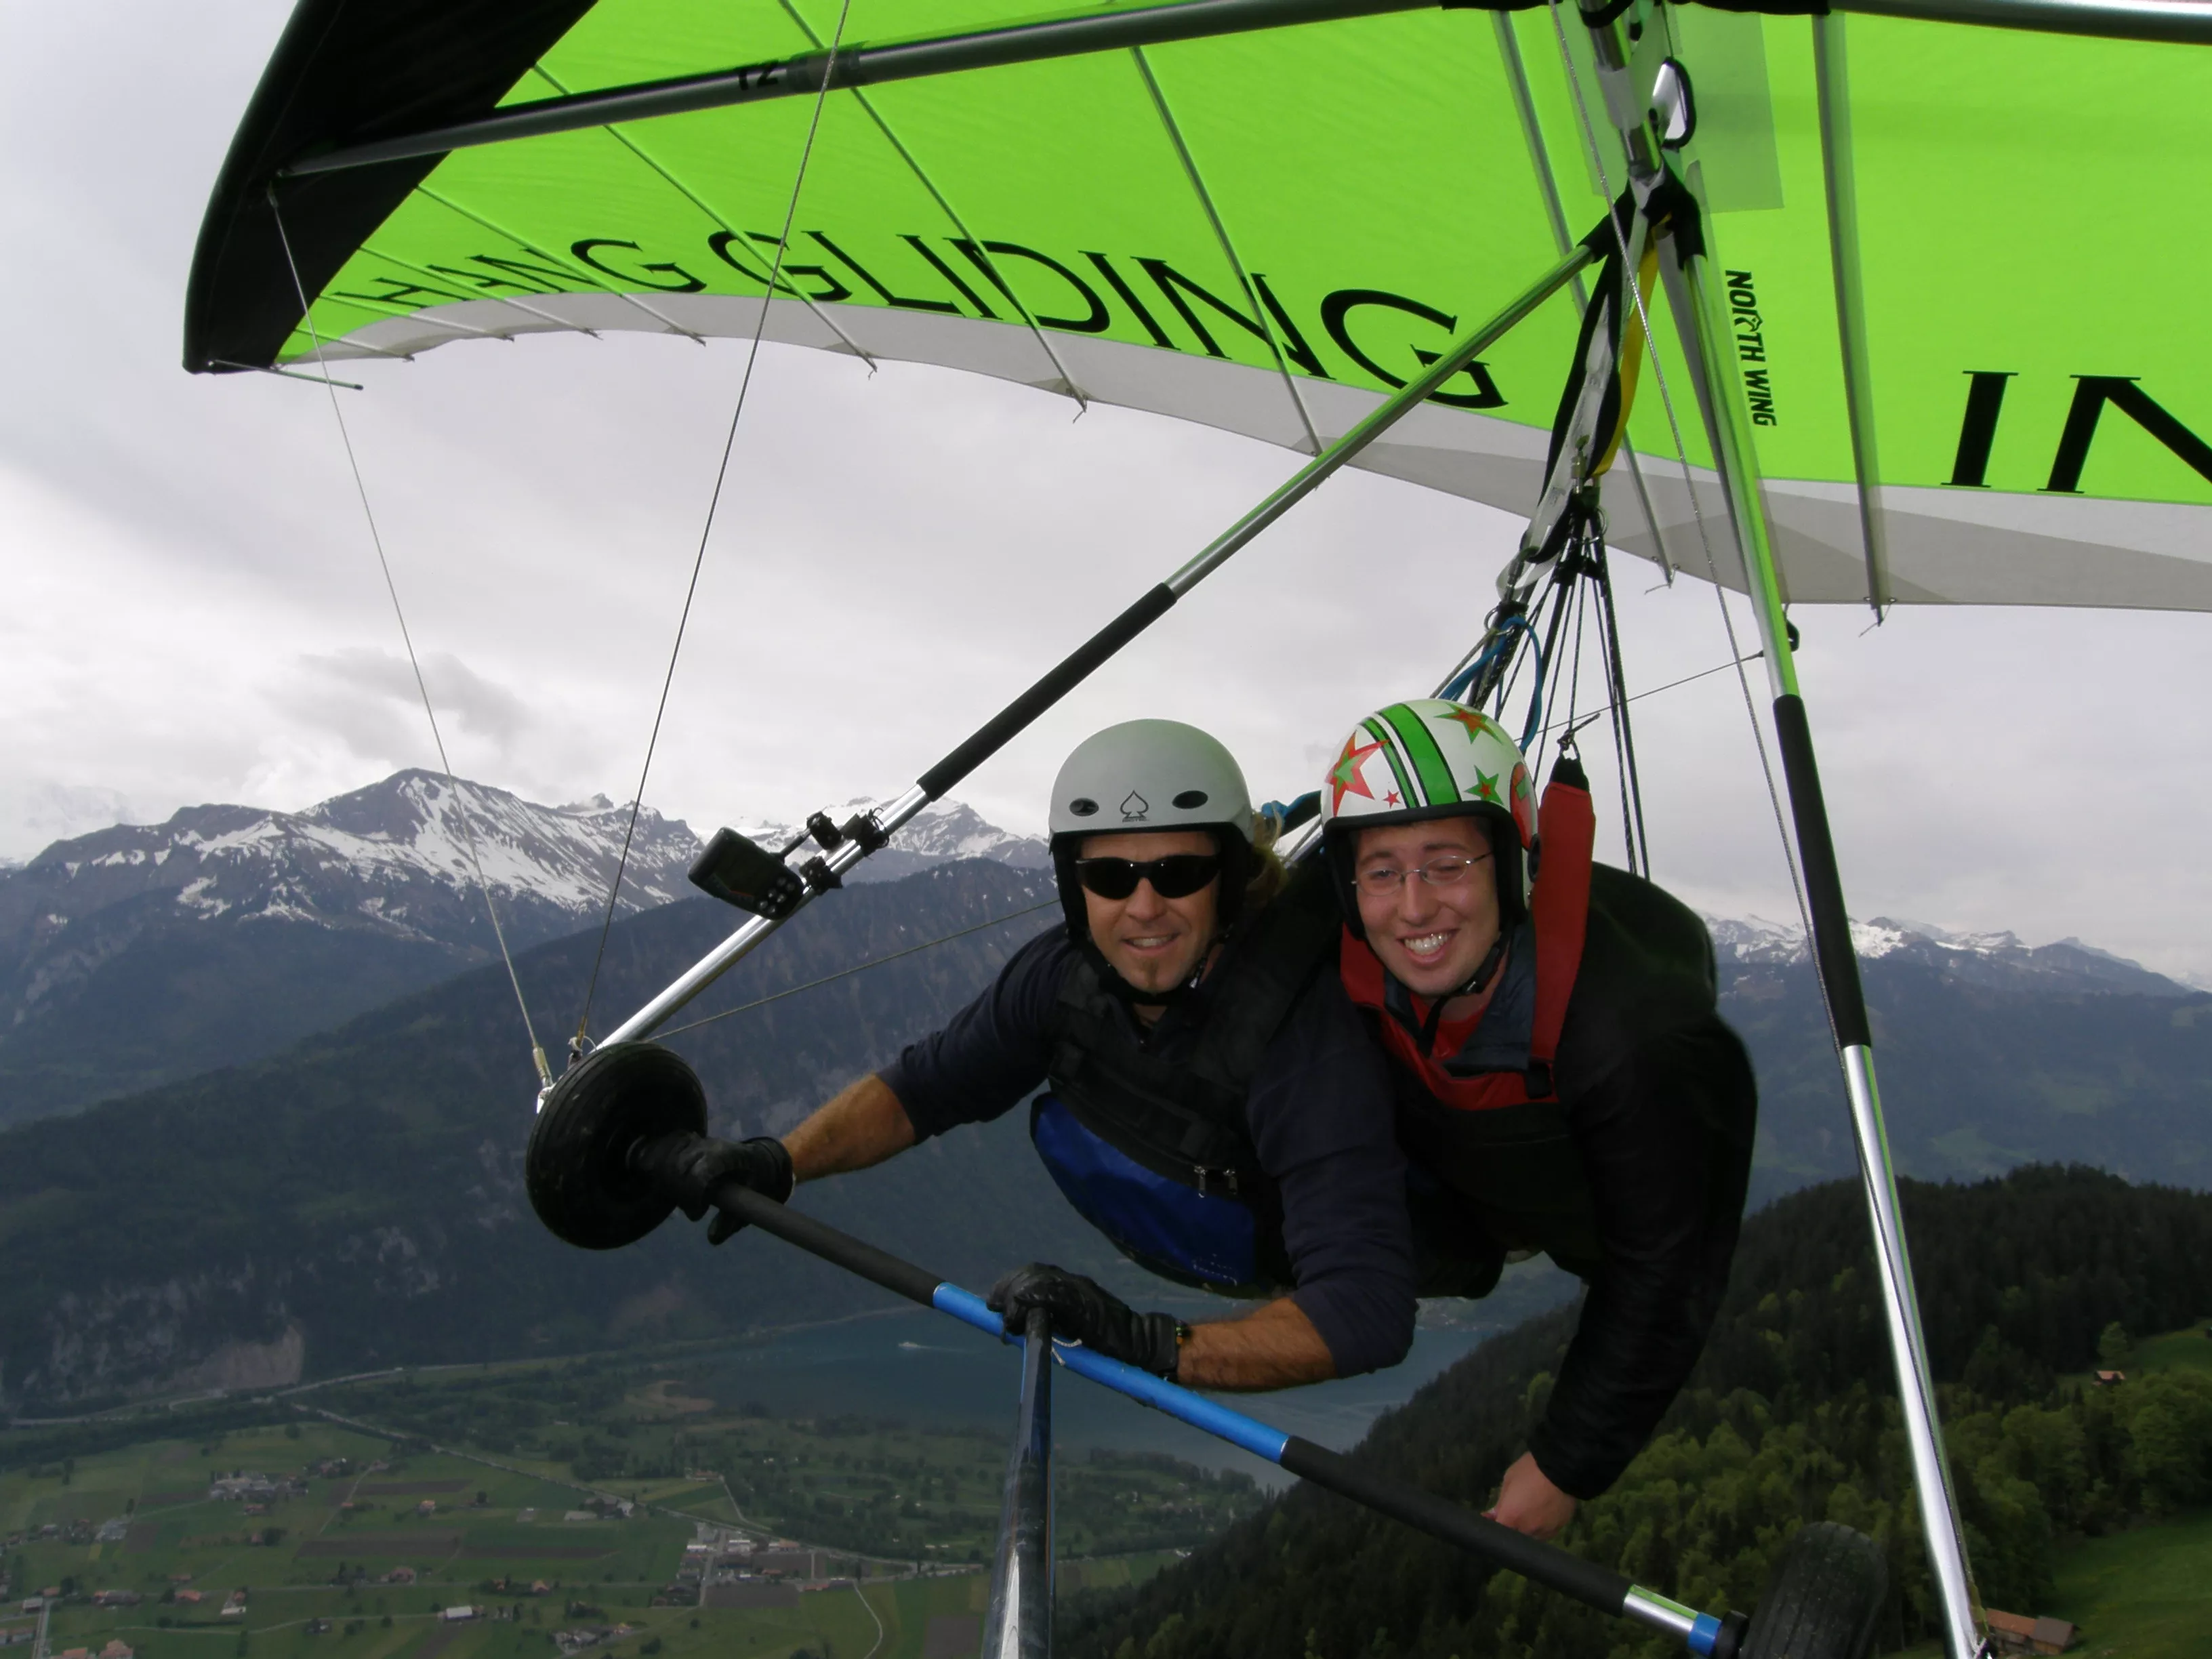 Absolute Chamonix - Parapente in France, Europe | Hang Gliding - Rated 4.1